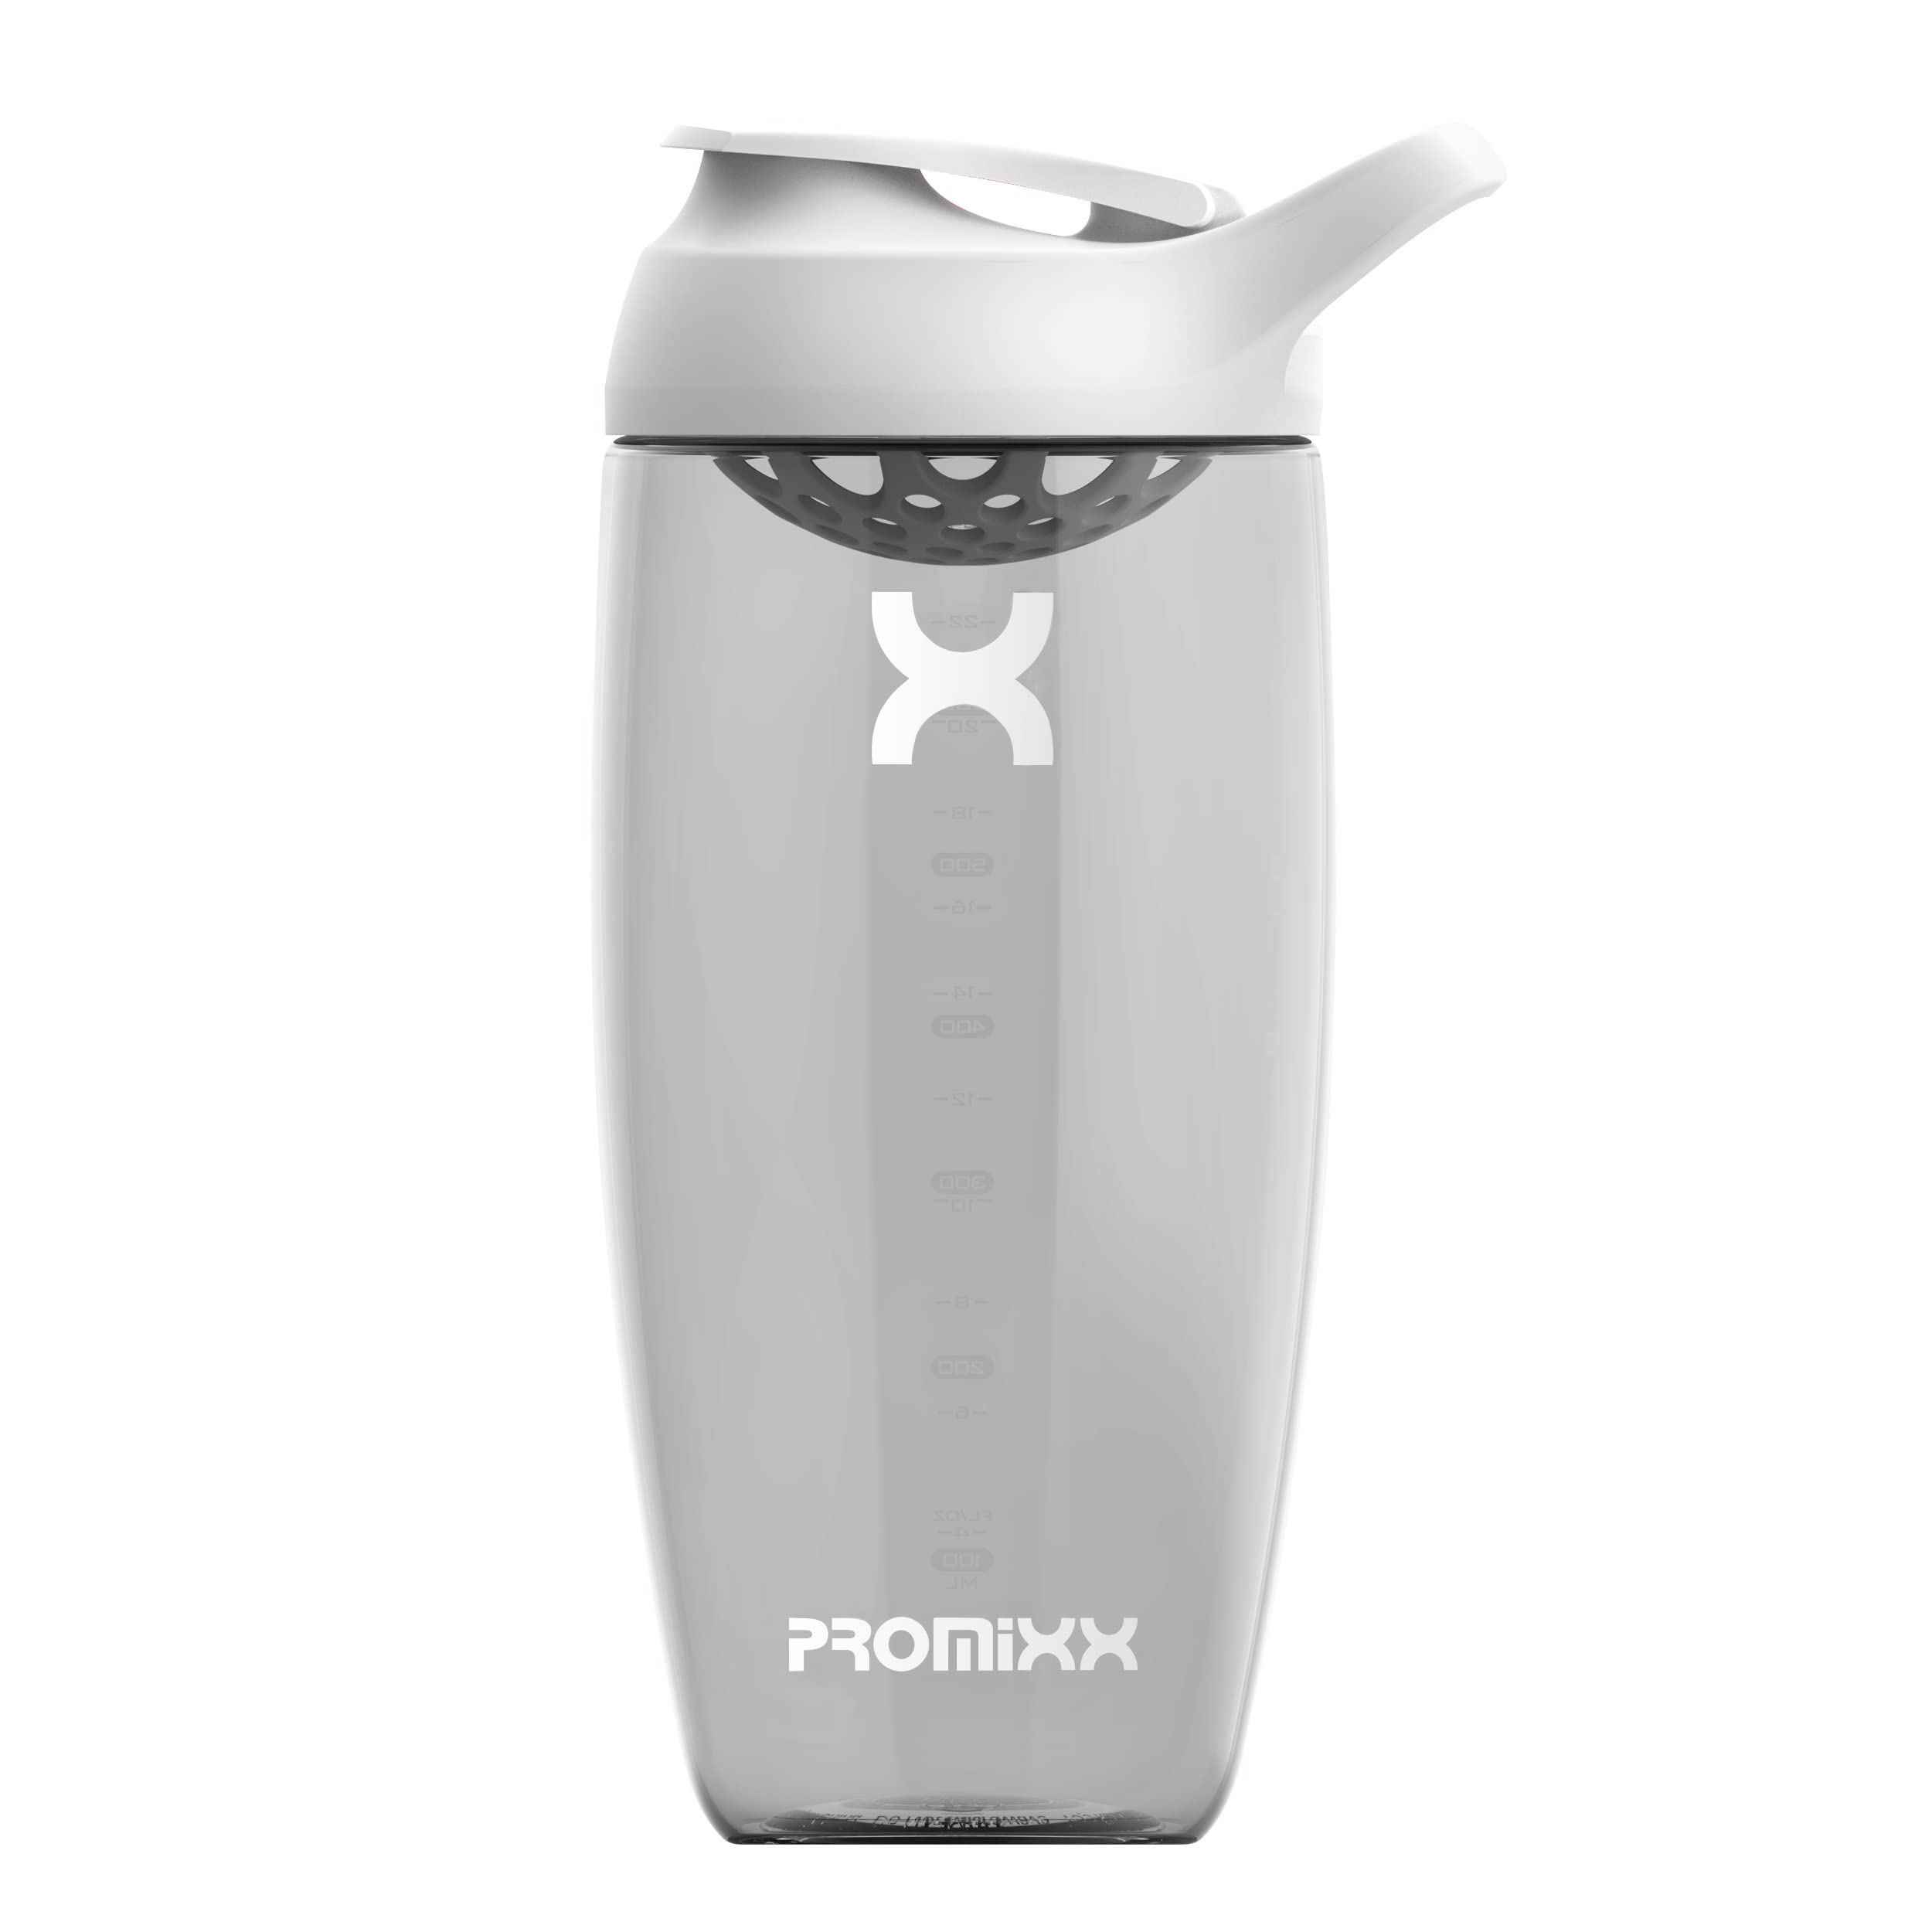 PROMiXX Shaker Bottle - Premium Protein Shaker Bottle for Supplement Shakes - Easy Clean, Durable Cup (700ml, Arctic White)